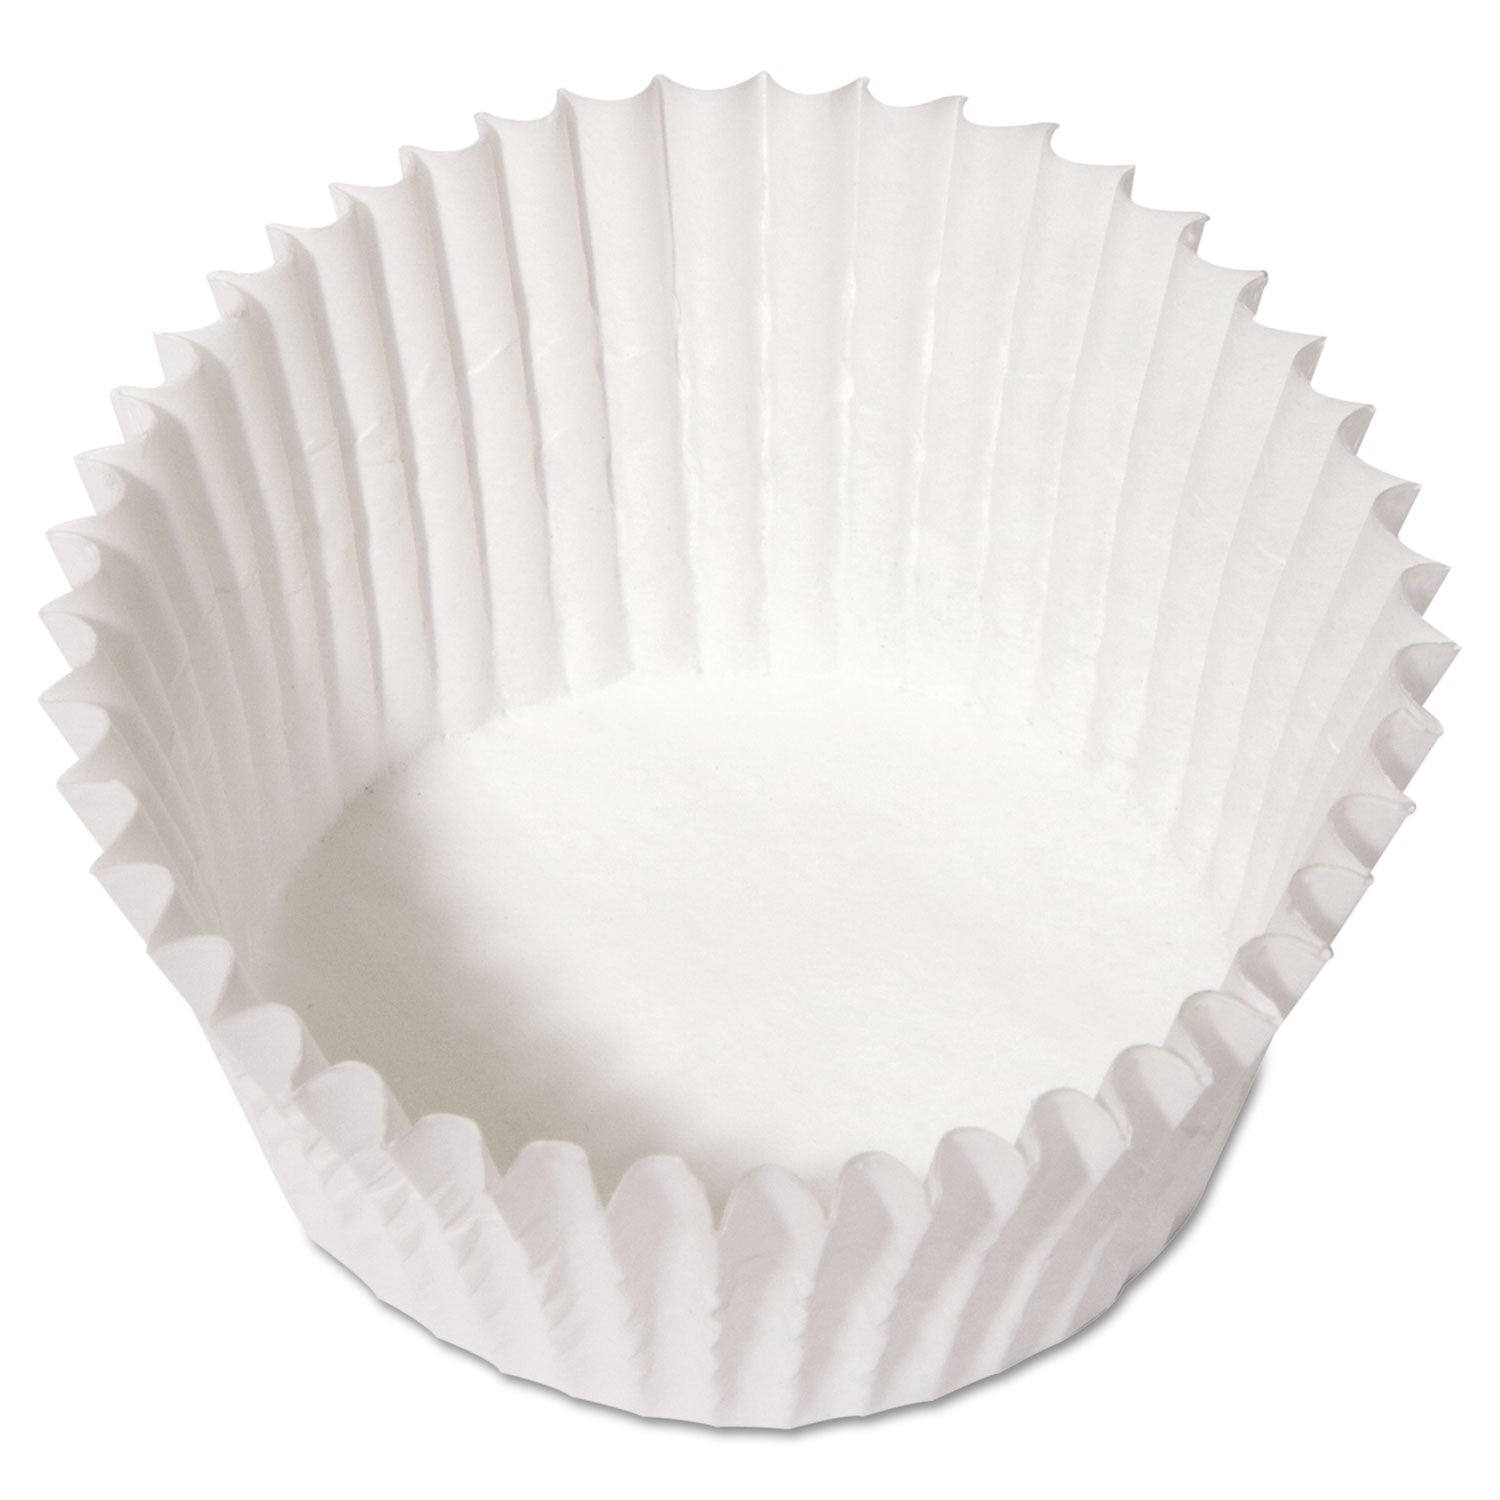 Fluted Bake Cups, 4.5 Diameter x 1.25 h, White, Paper, 500/Pack, 20 Packs/Carton - 